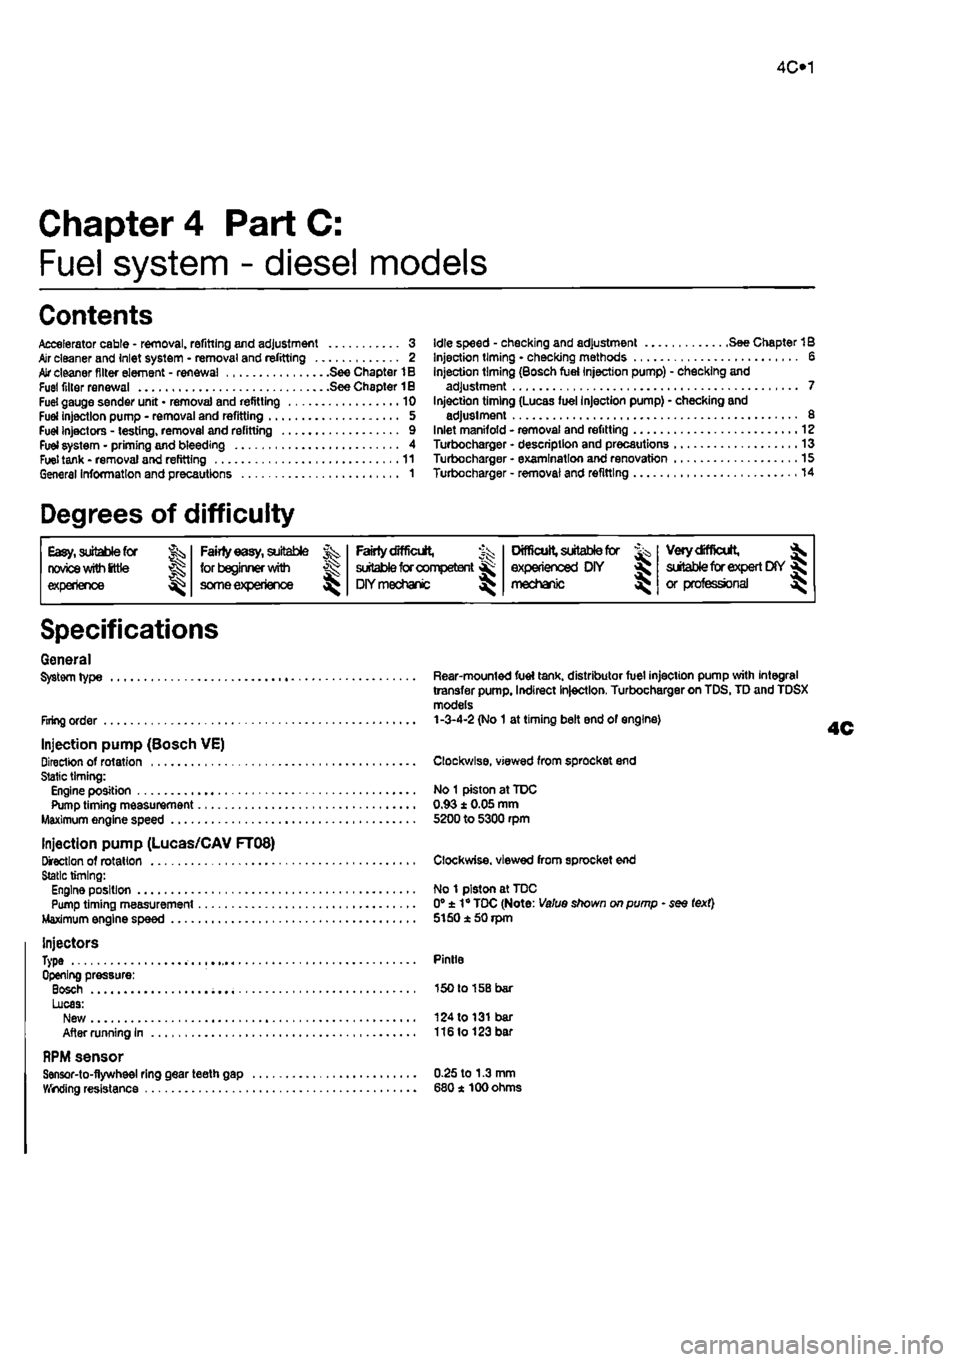 FIAT PUNTO 1994 176 / 1.G Service Manual 
4C»1 
Chapter 4 PartC: 
Fuel system - diesel models 
Contents 
Accelerator cable • removal, refitting and adjustment 3 Air cleaner and inlet system • removal and refitting 2 
AJr
 cleaner filter